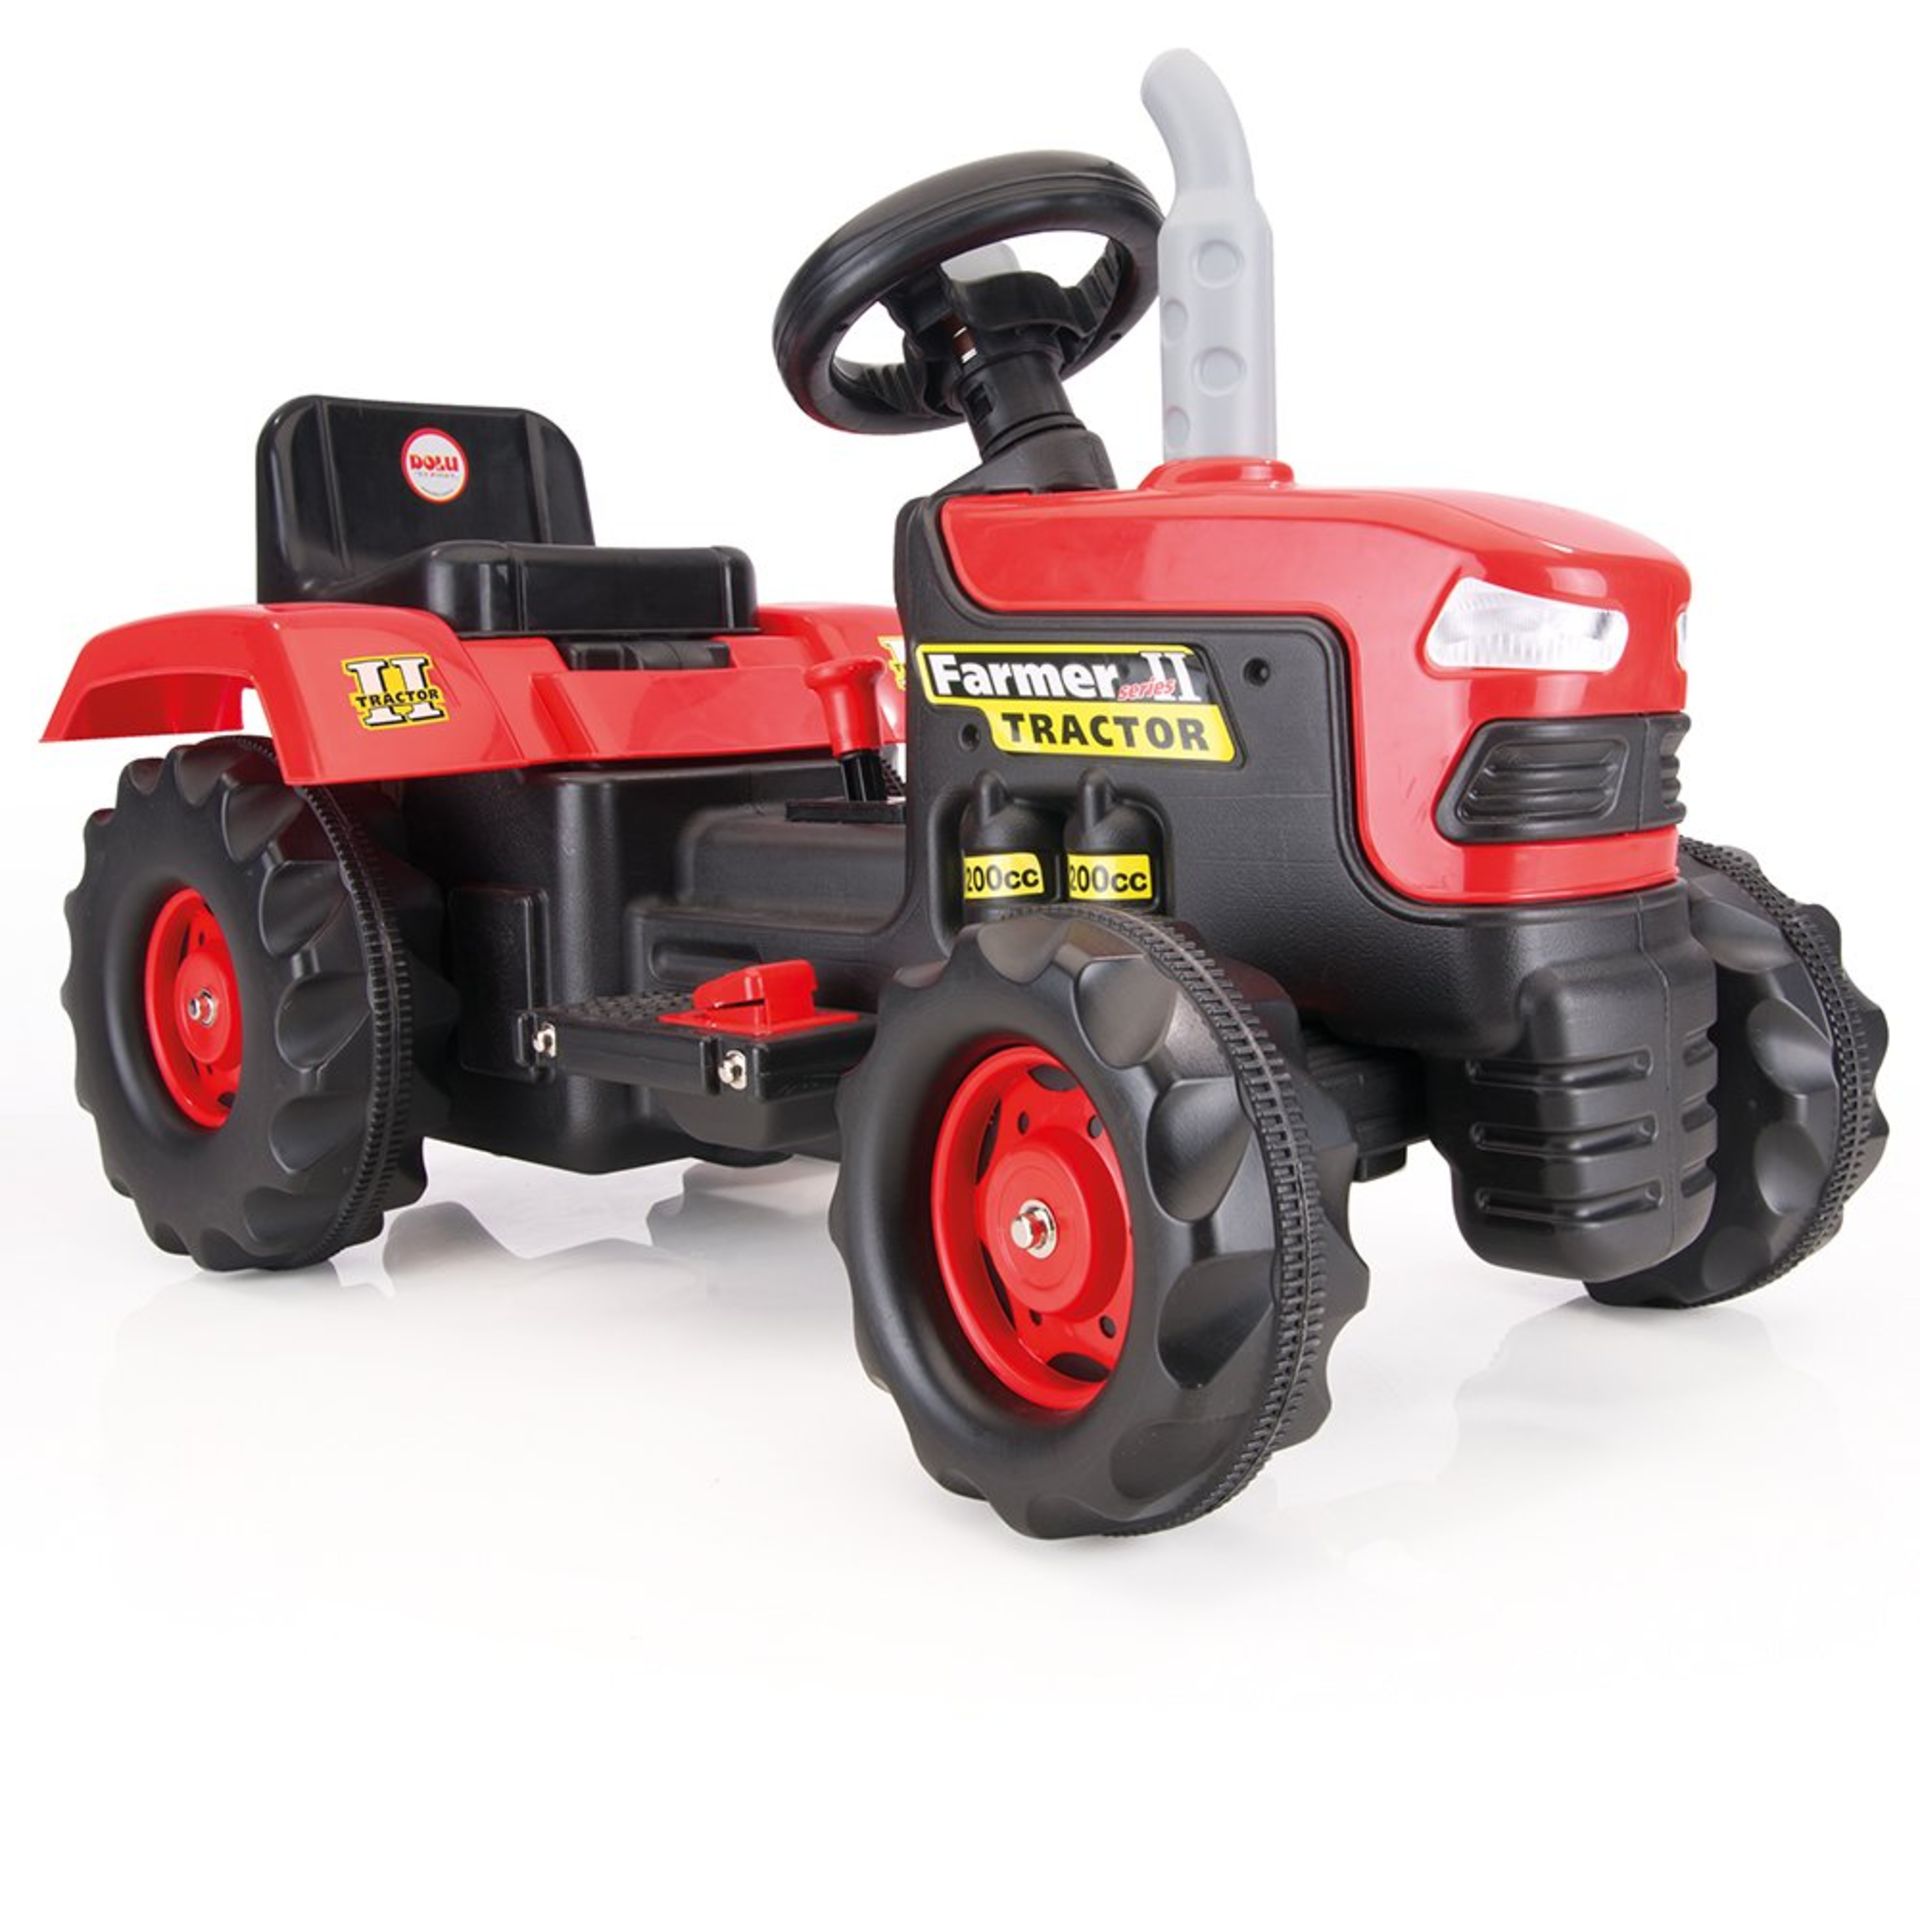 1 x Farm Tractor Battery Operated 6v | 8690089080615 | RRP £ 67.99 - Image 2 of 2